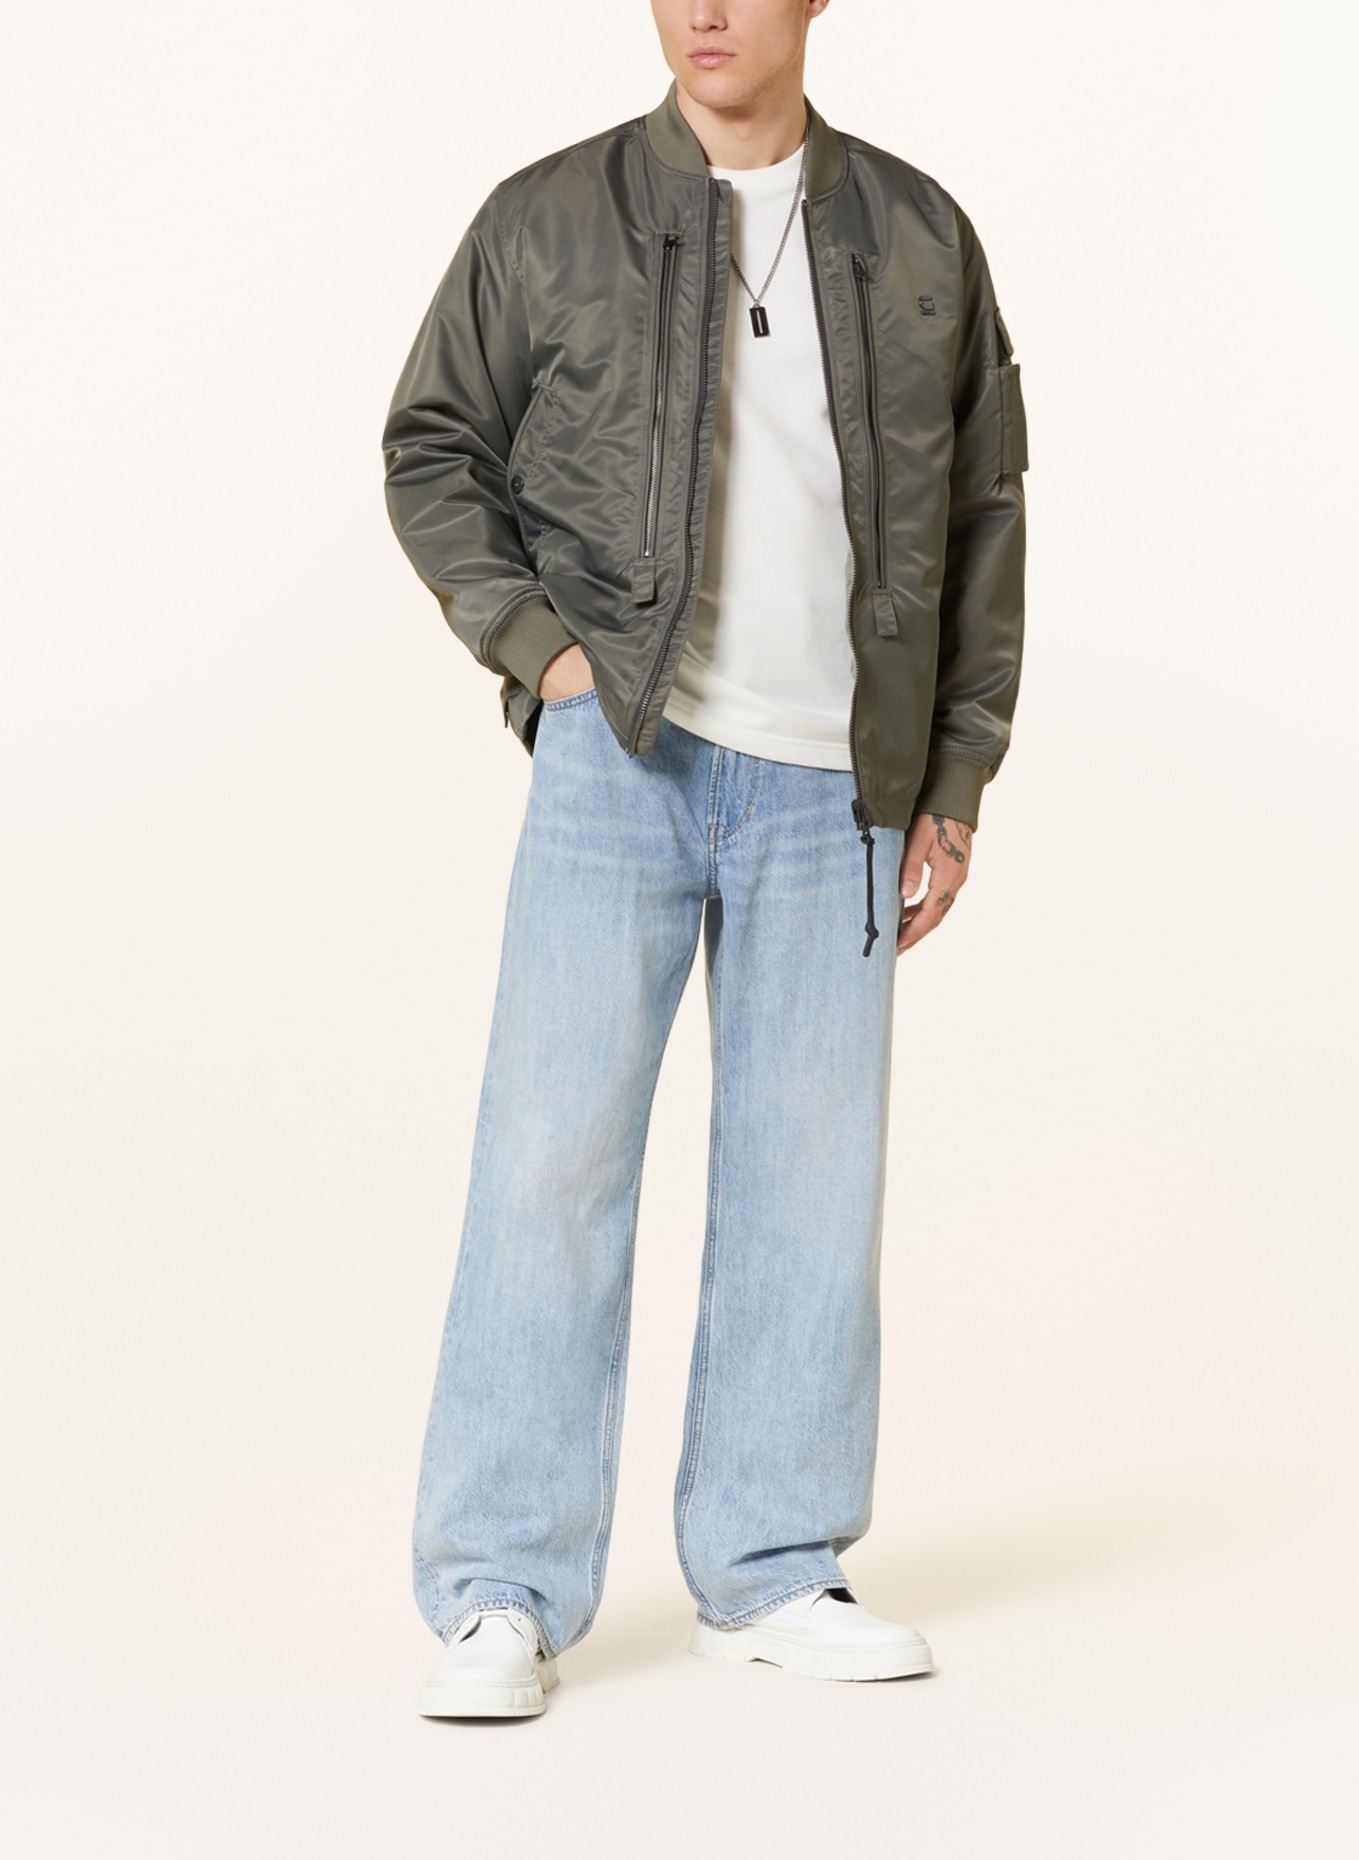 G-Star RAW Jeans TYPE 96 LOOSE Relaxed Straight Fit, Farbe: G339 sun faded cloudburst (Bild 2)